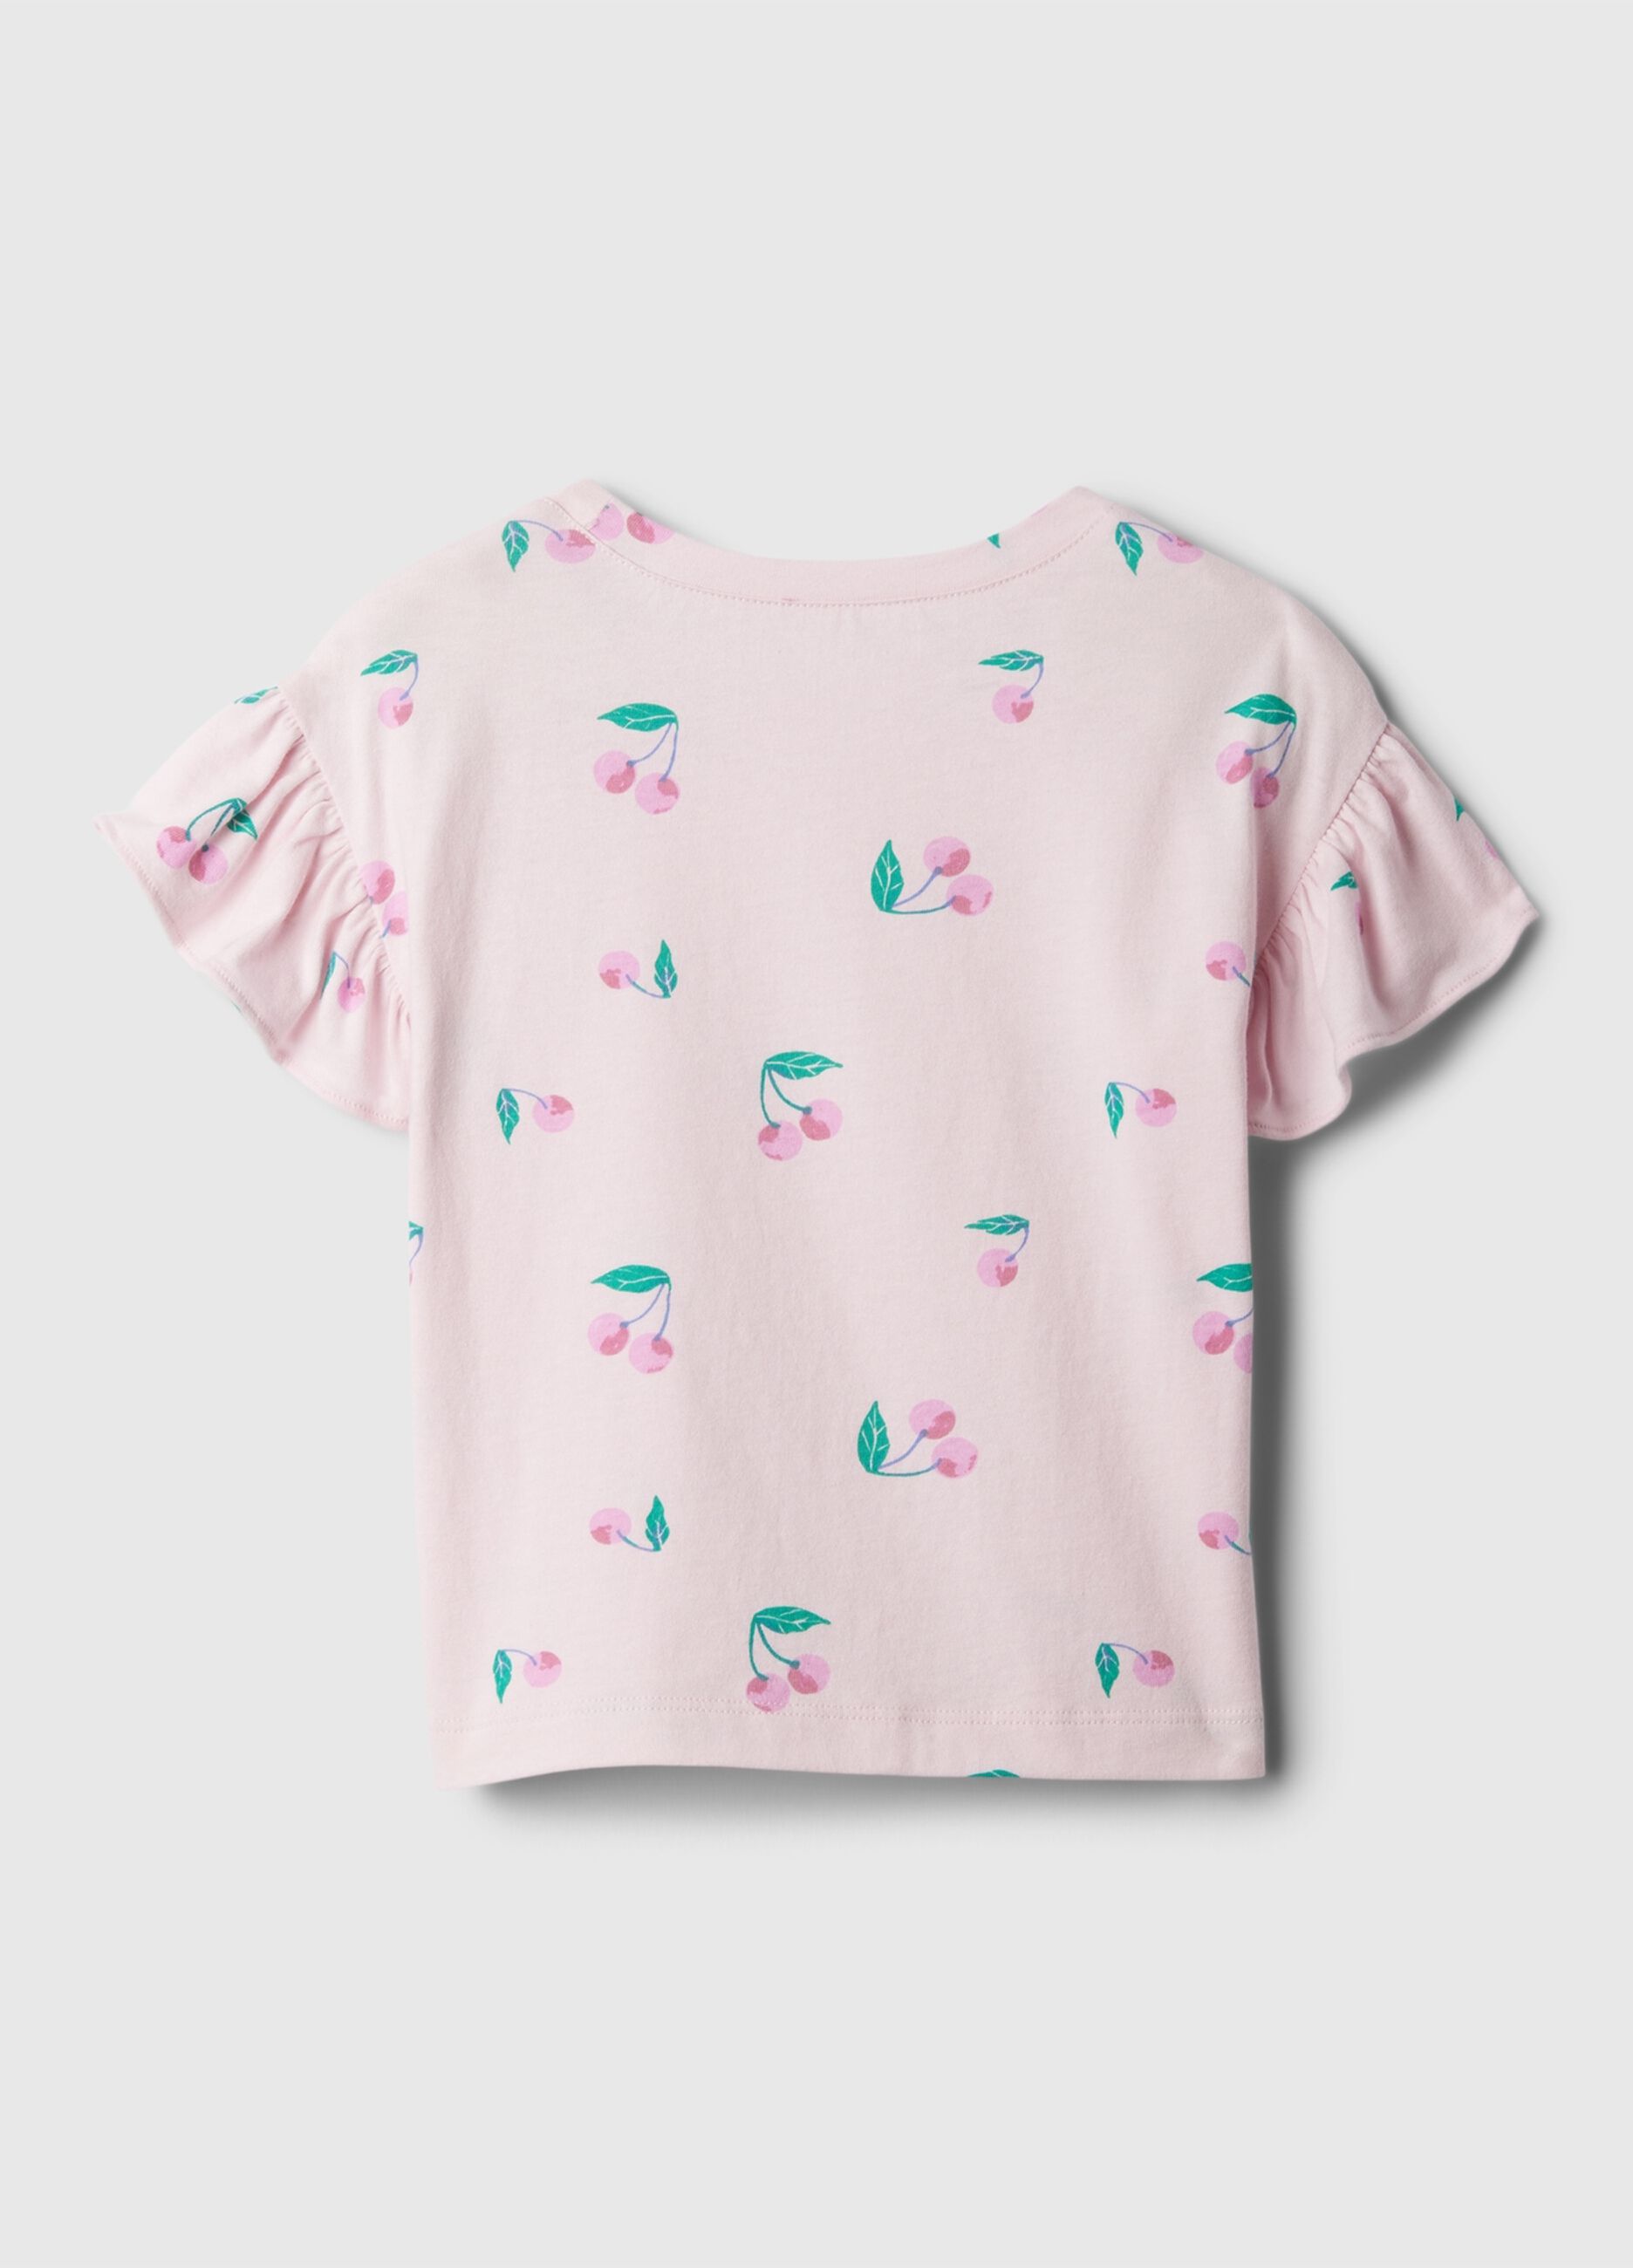 Printed T-shirt with cap sleeves